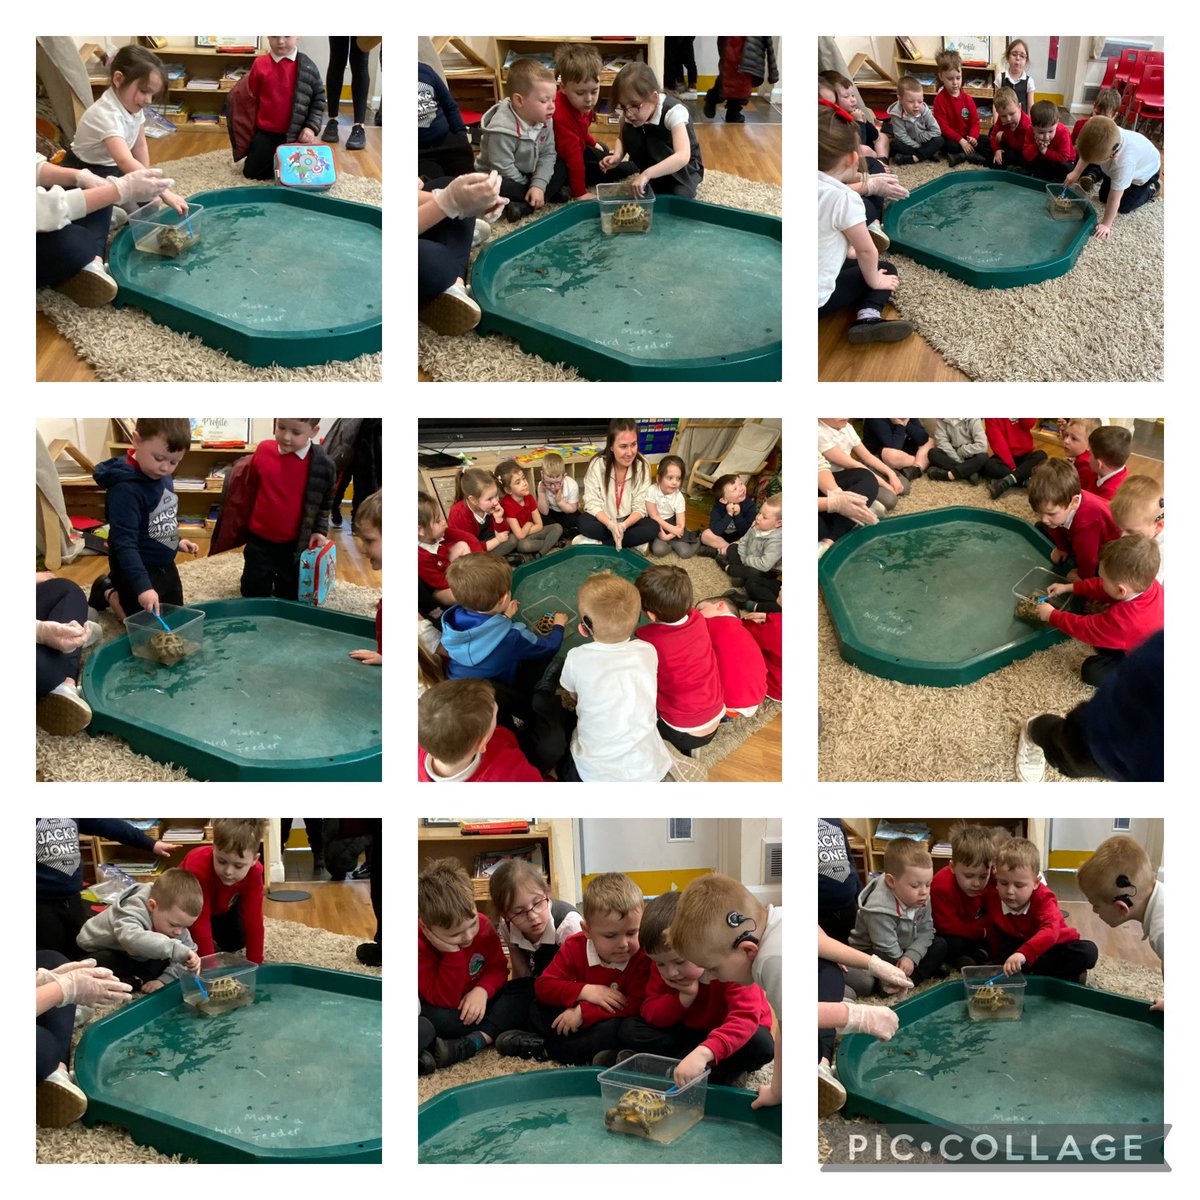 This afternoon pupils in reception enjoyed giving Speedy a bath 🐢@NantYParcSchool